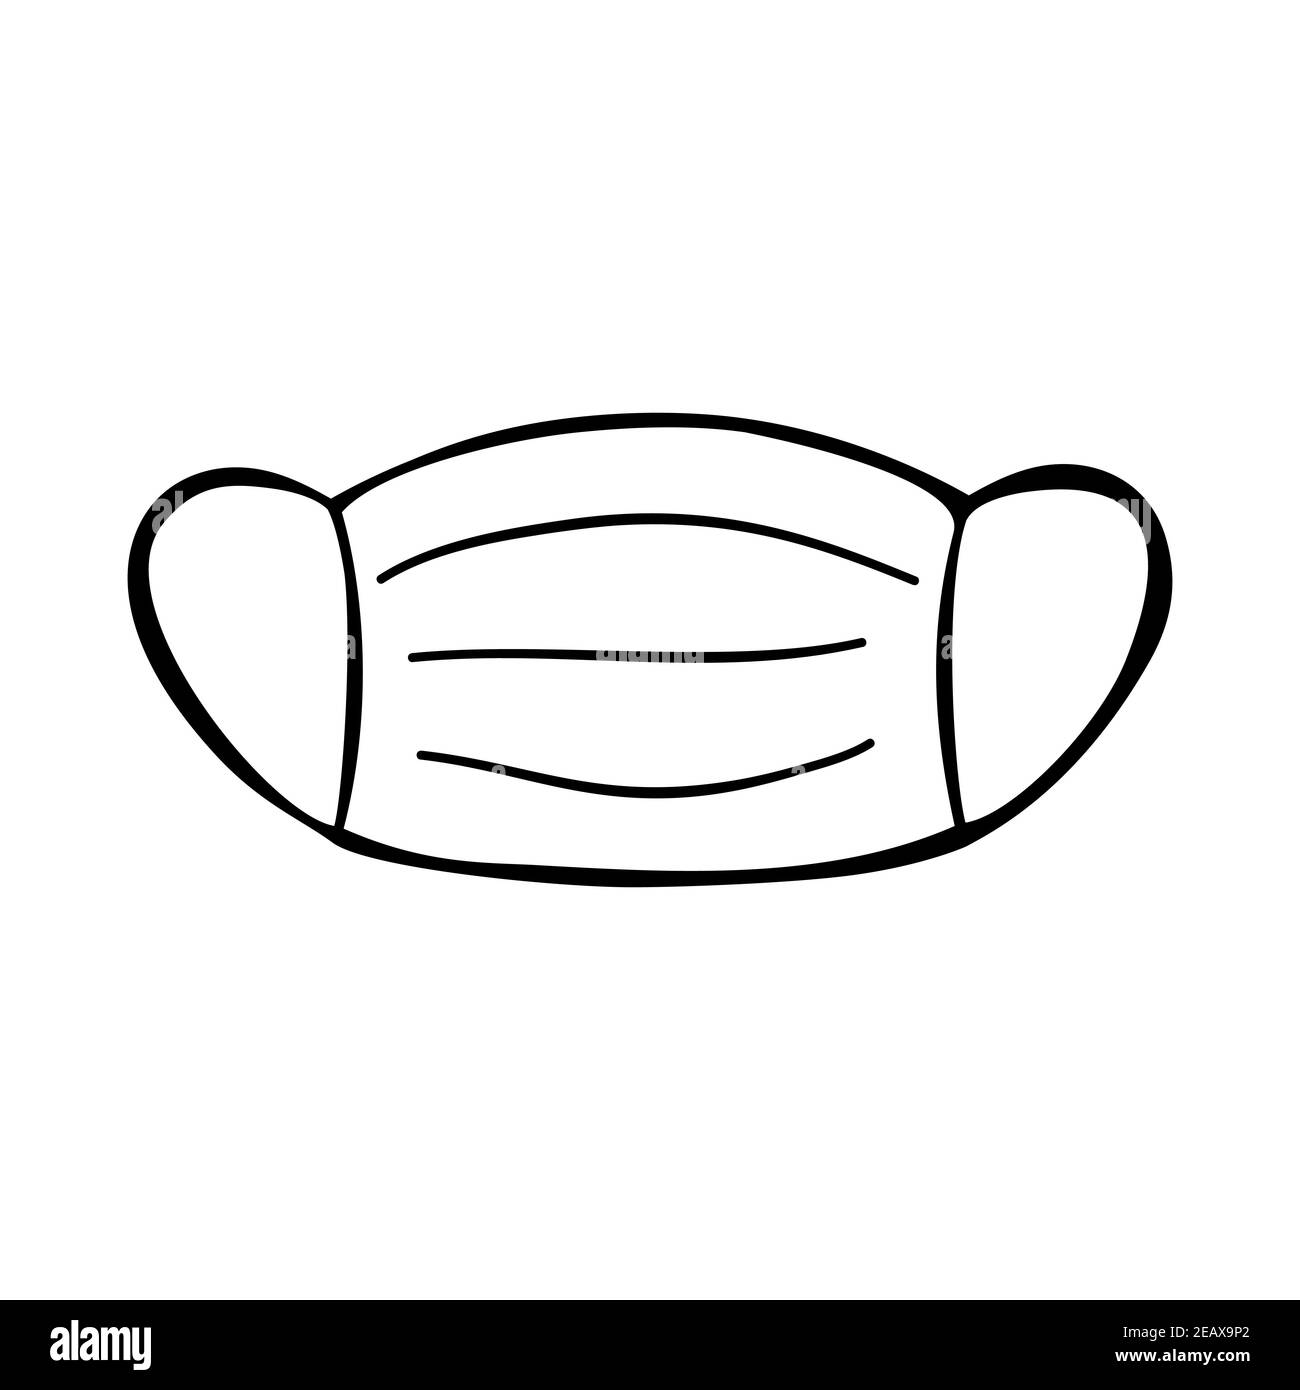 Simple hand drawn medical face mask icon. Isolated on a white background. Vector stock illustrarion. Stock Vector